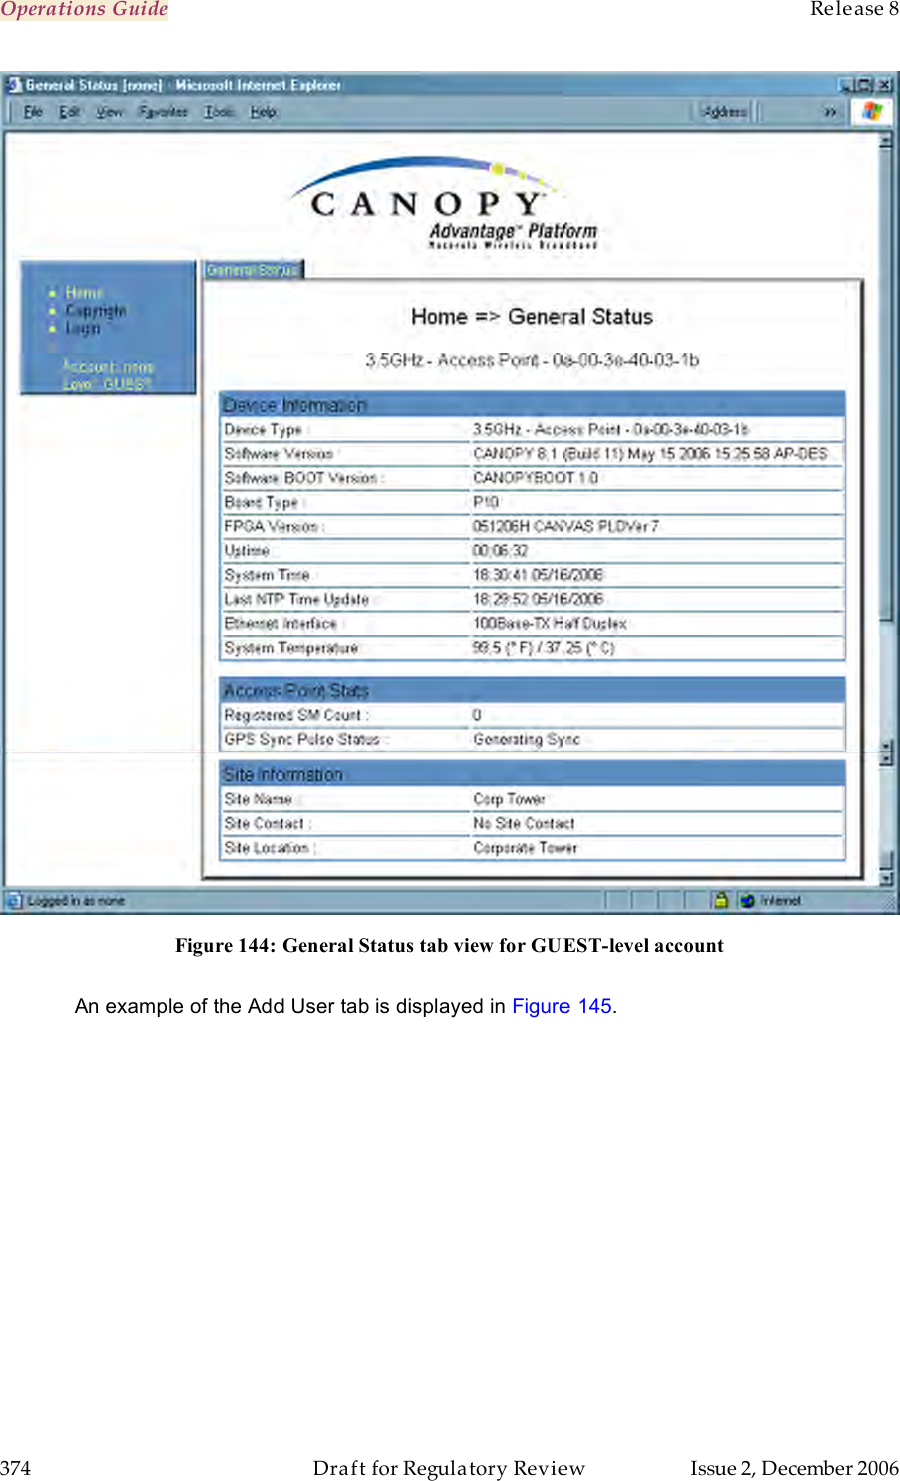 Operations Guide    Release 8   374  Draft for Regulatory Review  Issue 2, December 2006  Figure 144: General Status tab view for GUEST-level account  An example of the Add User tab is displayed in Figure 145. 